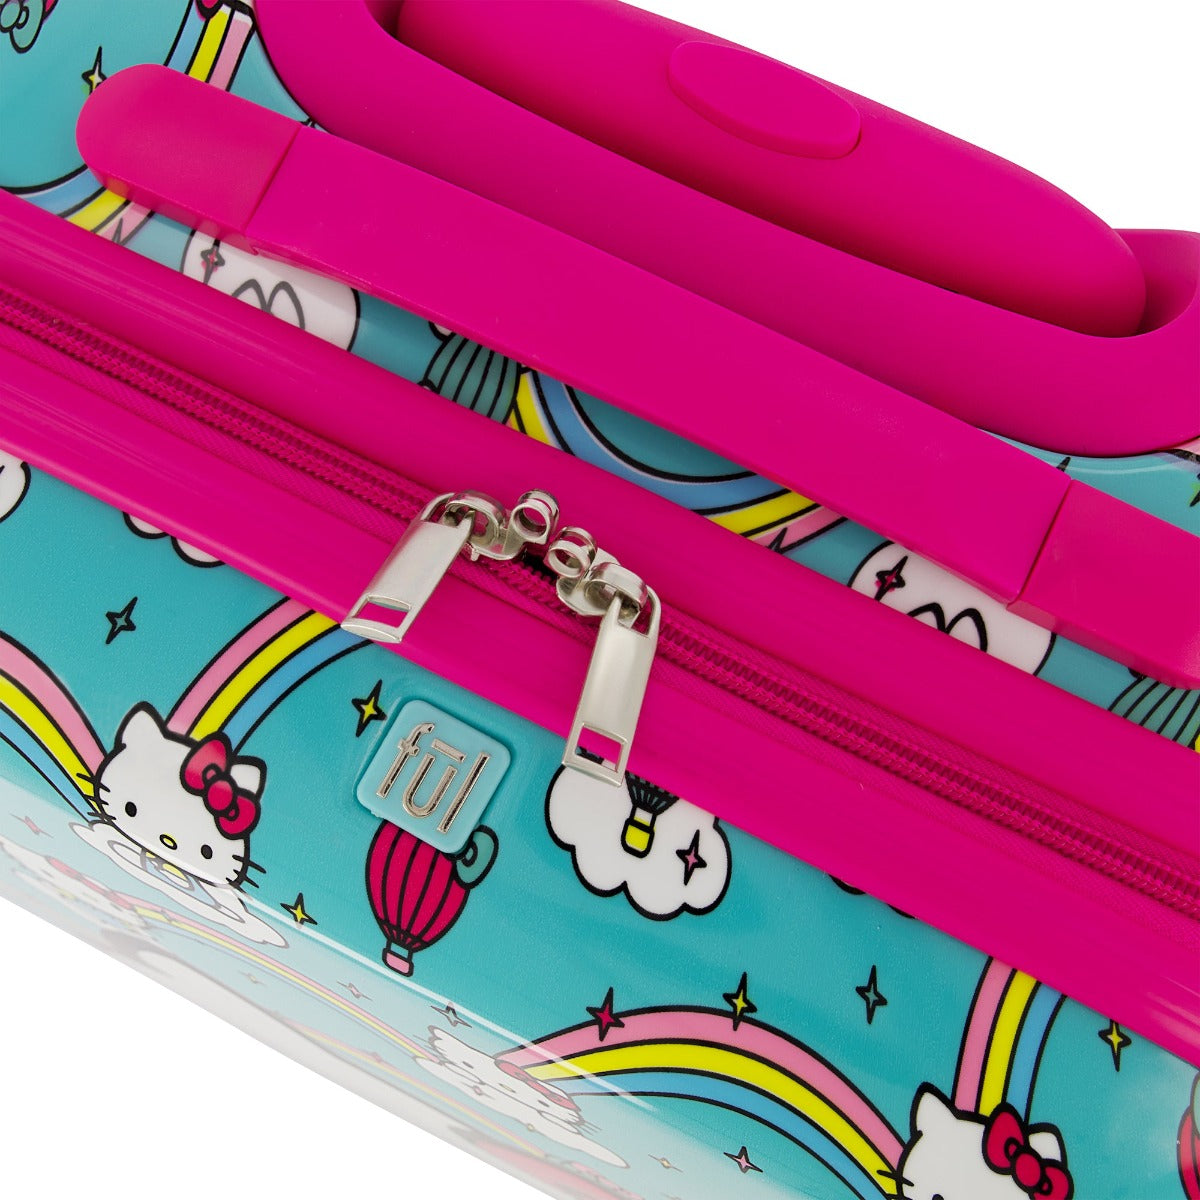 Hello Kitty Ful Rainbows - kids 21" hardside spinner suitcase for traveling